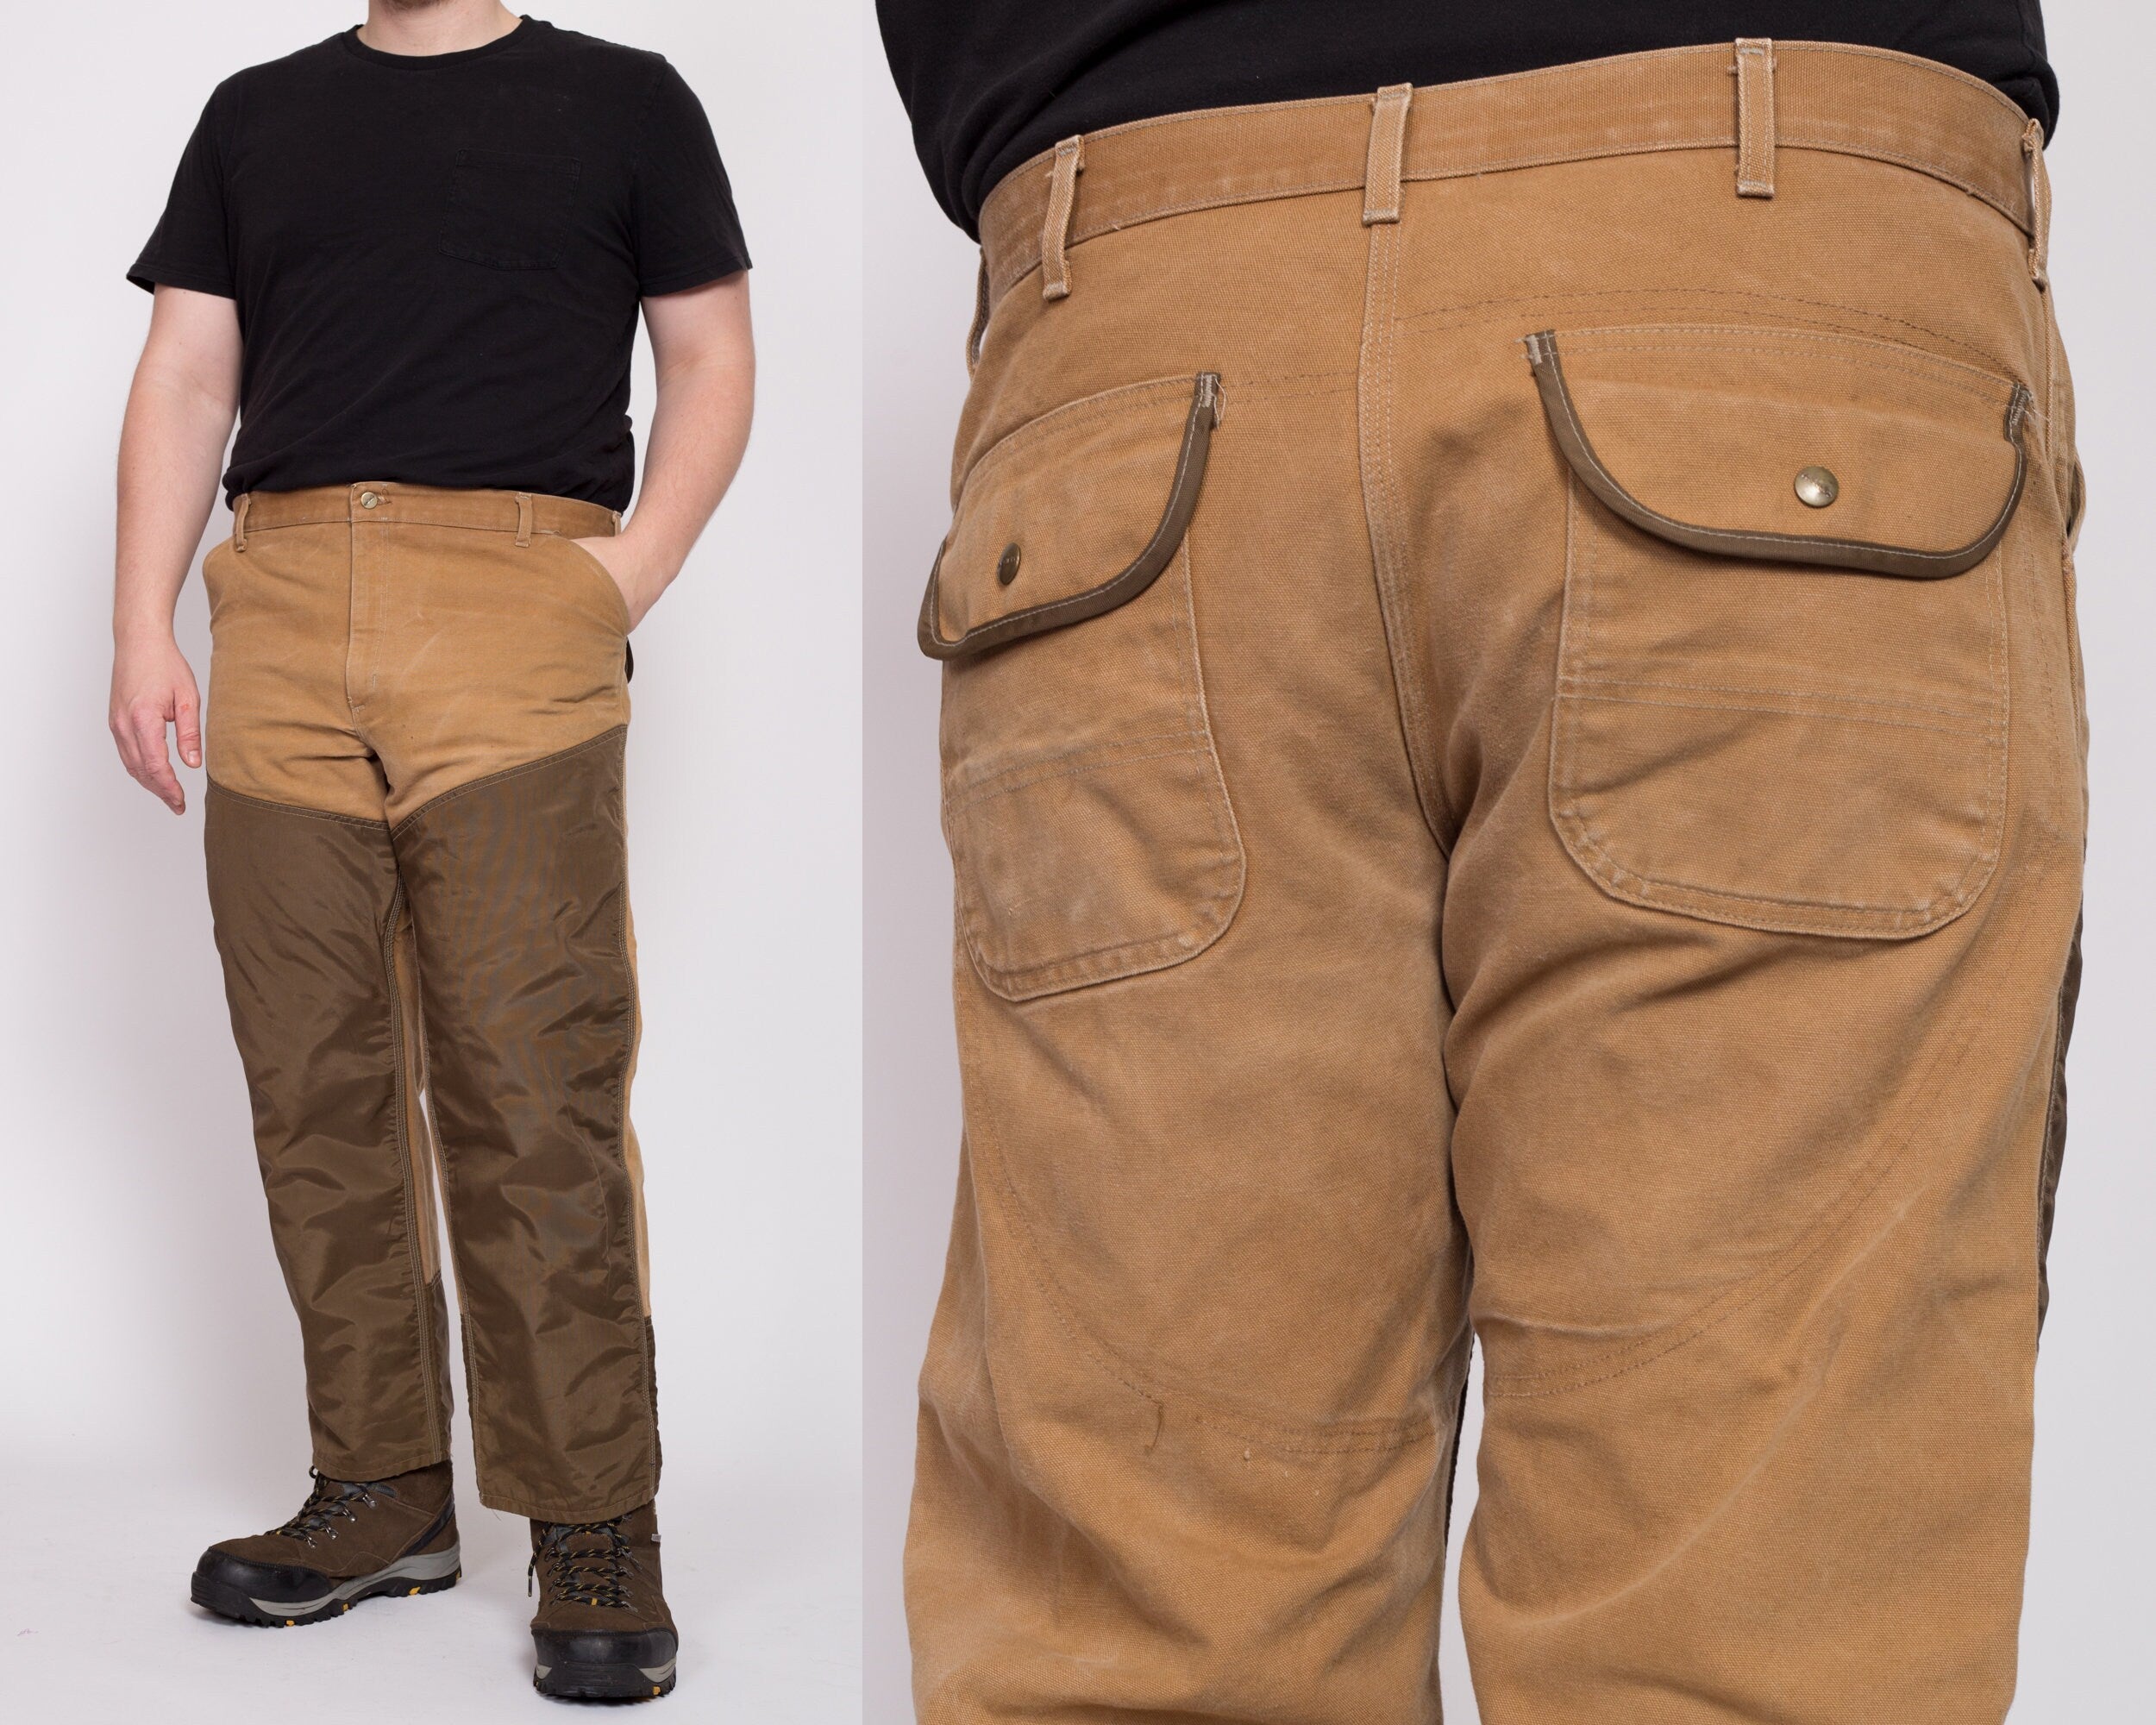 Snickers Canvas Trousers with Holster Pockets | Bodyguard Workwear